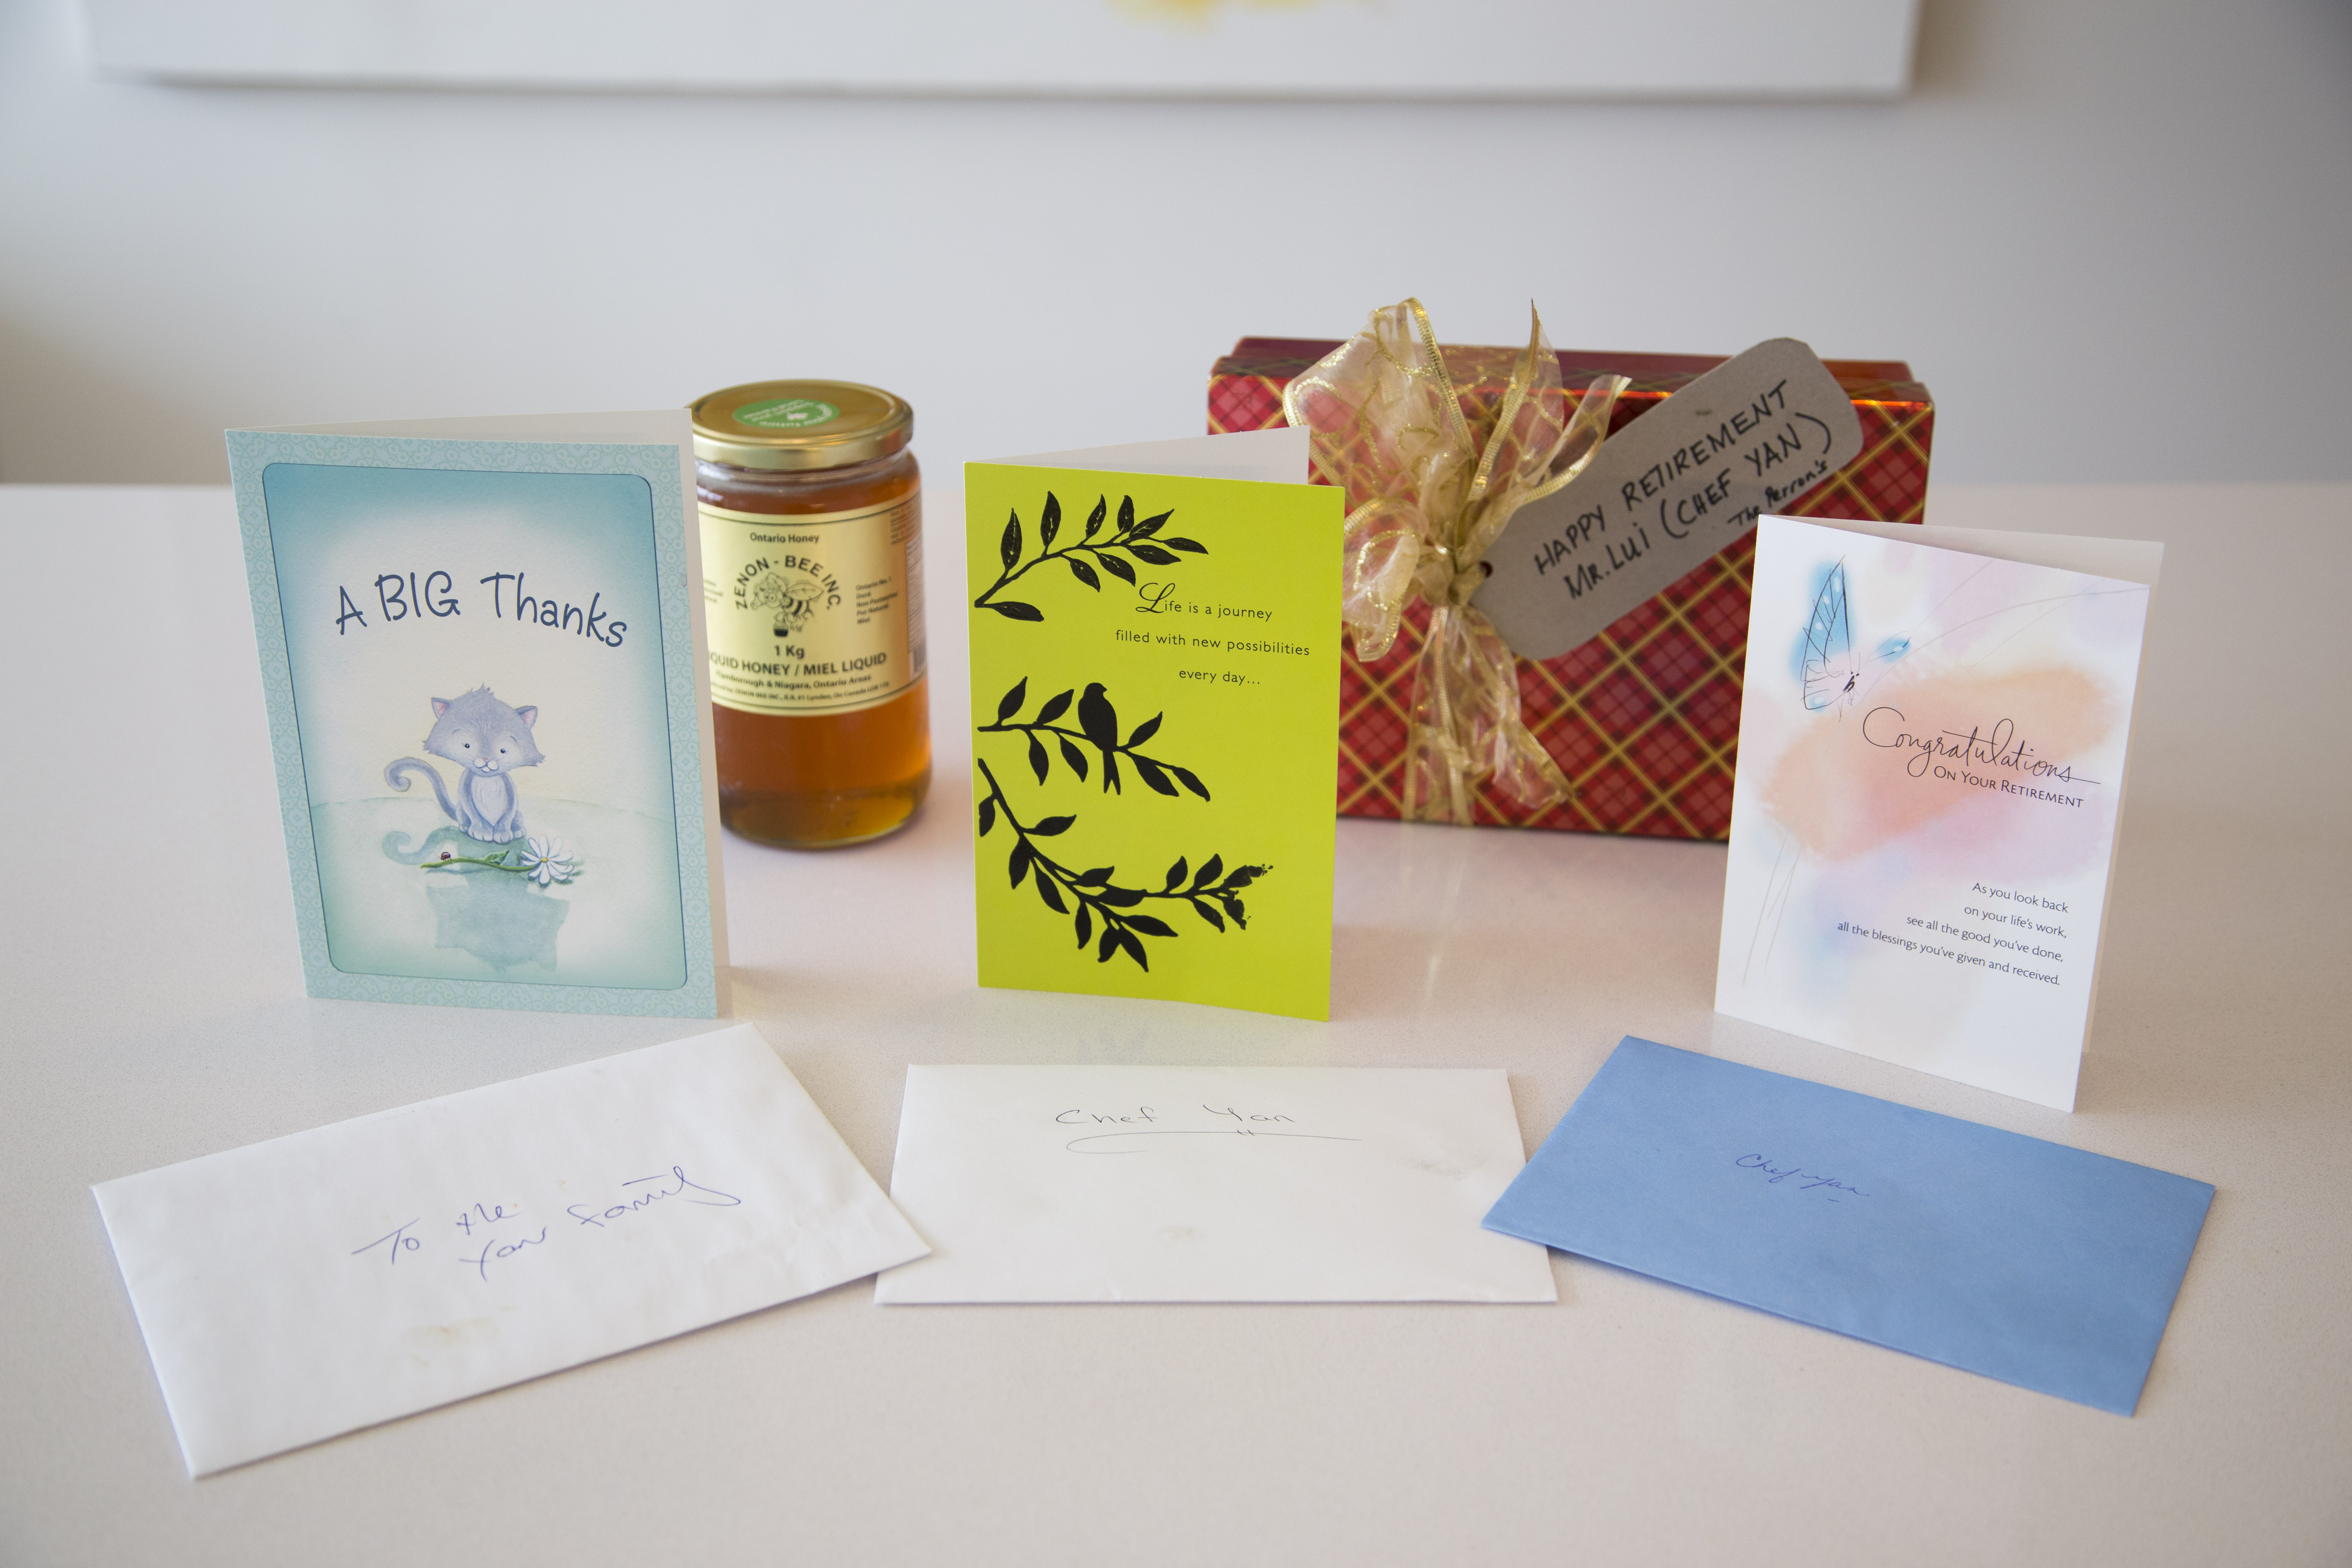 chef-yan-retiring-cards-gifts